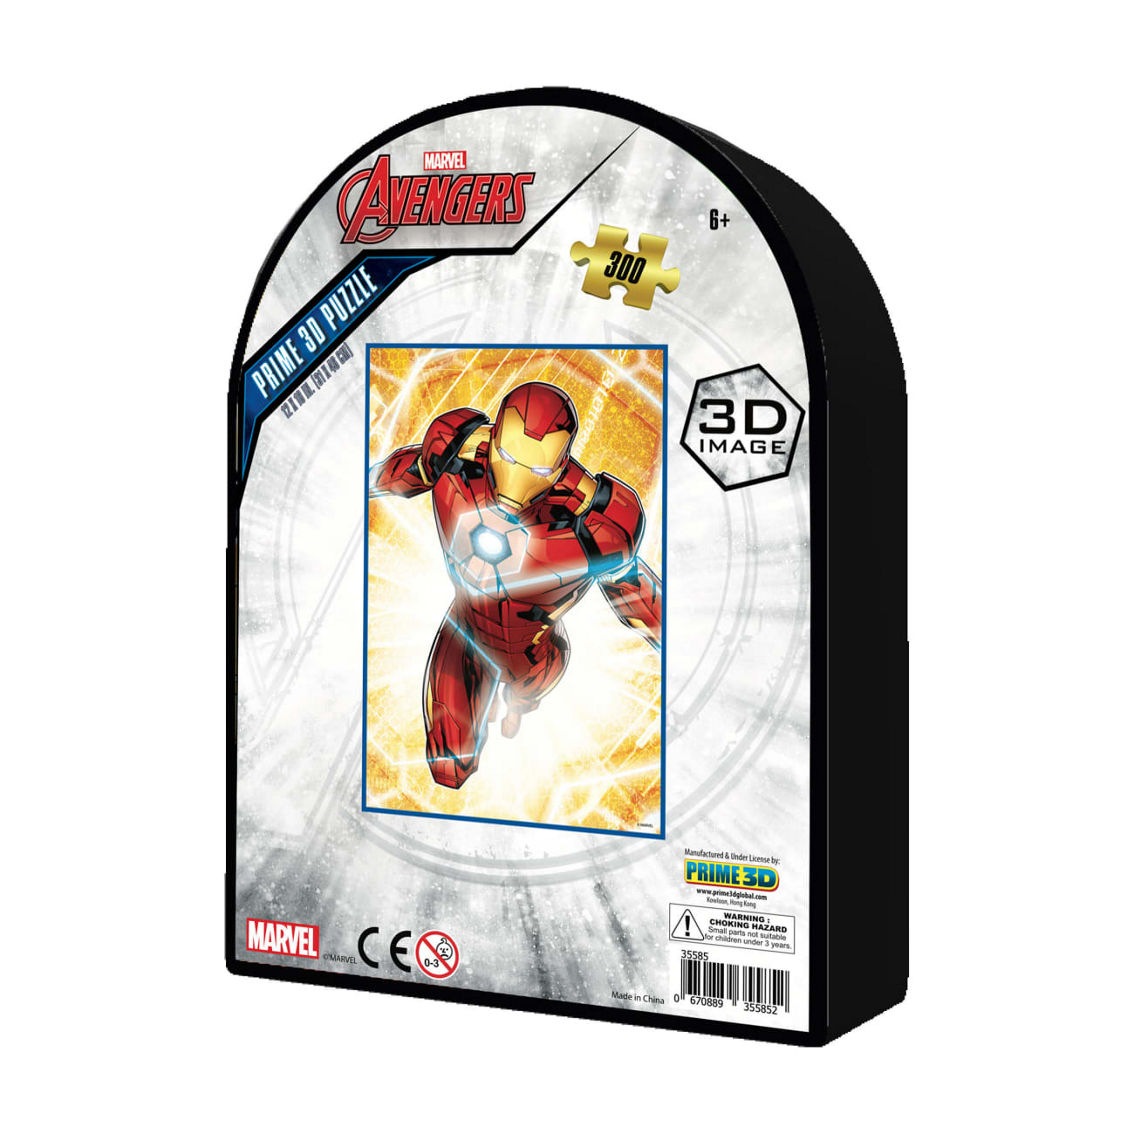 Prime 3D Marvel Avengers Iron Man 3D Lenticular Puzzle in a Shaped Tin: 300 Pcs - Image 3 of 5